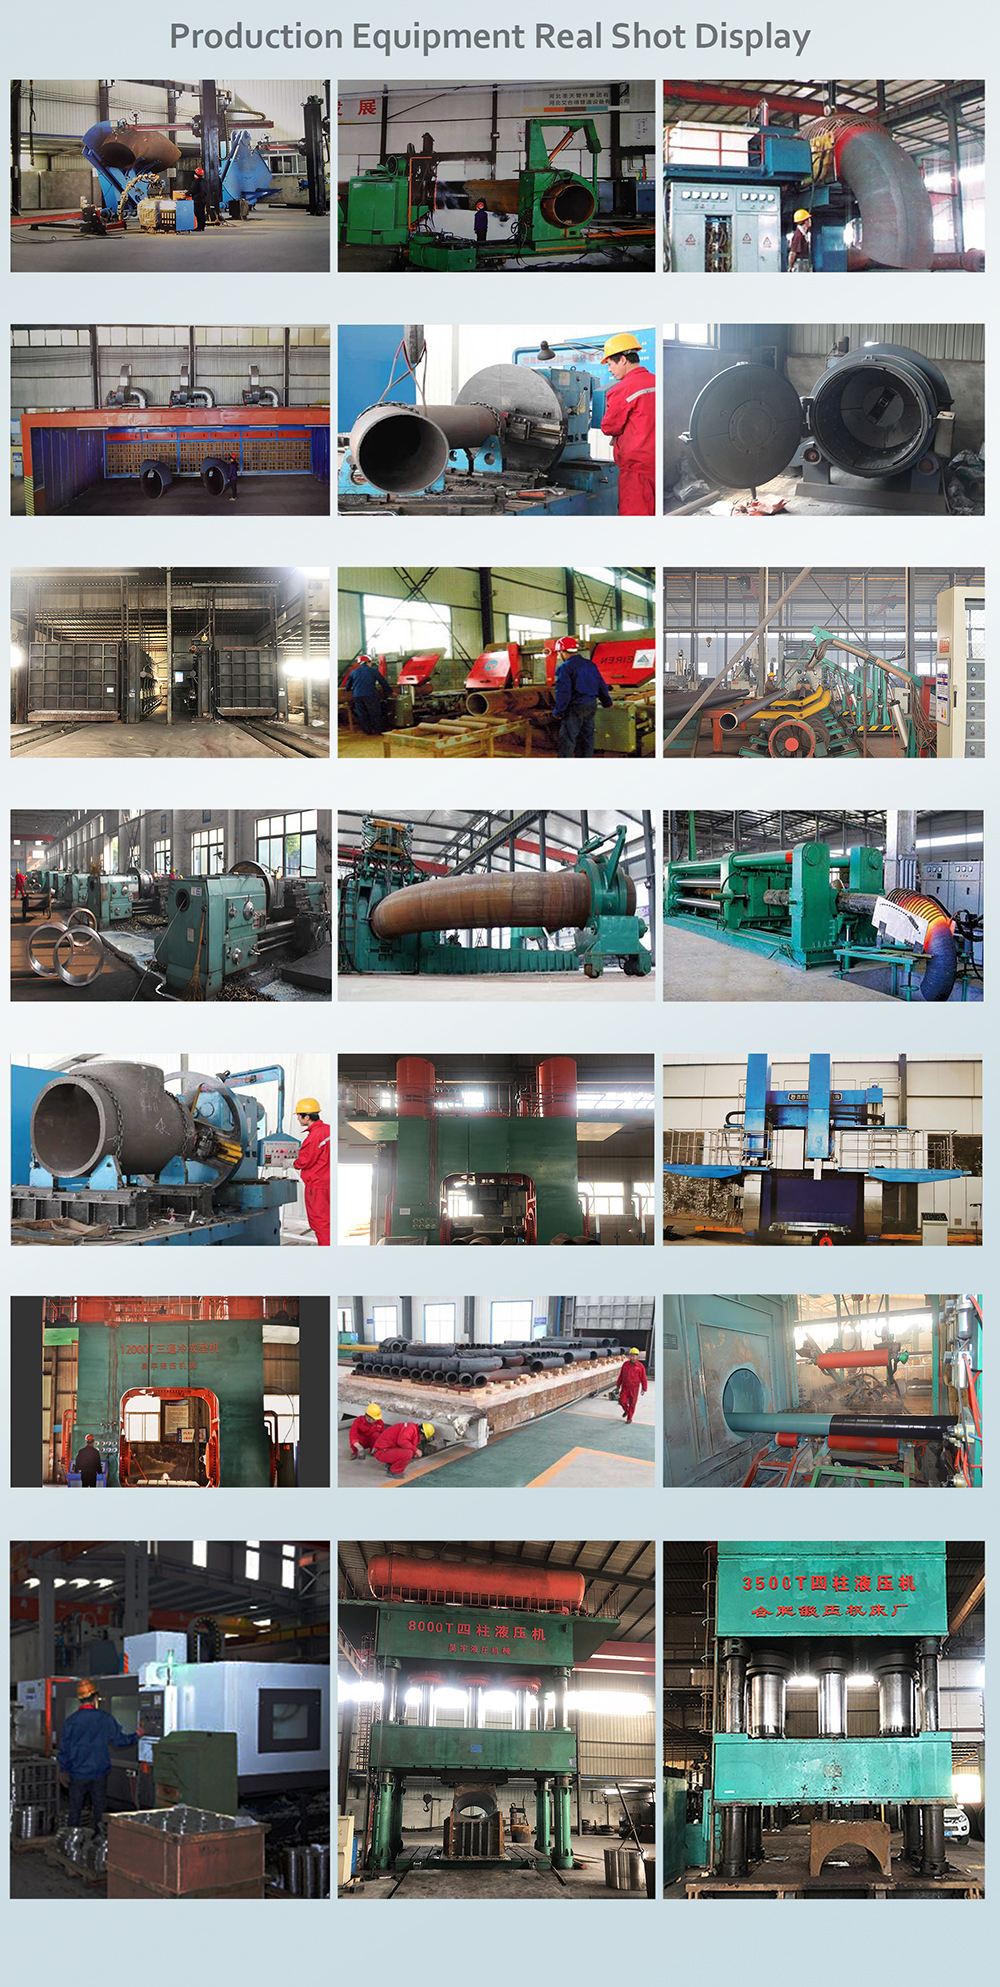 Pipe fittings and flanges production equipment